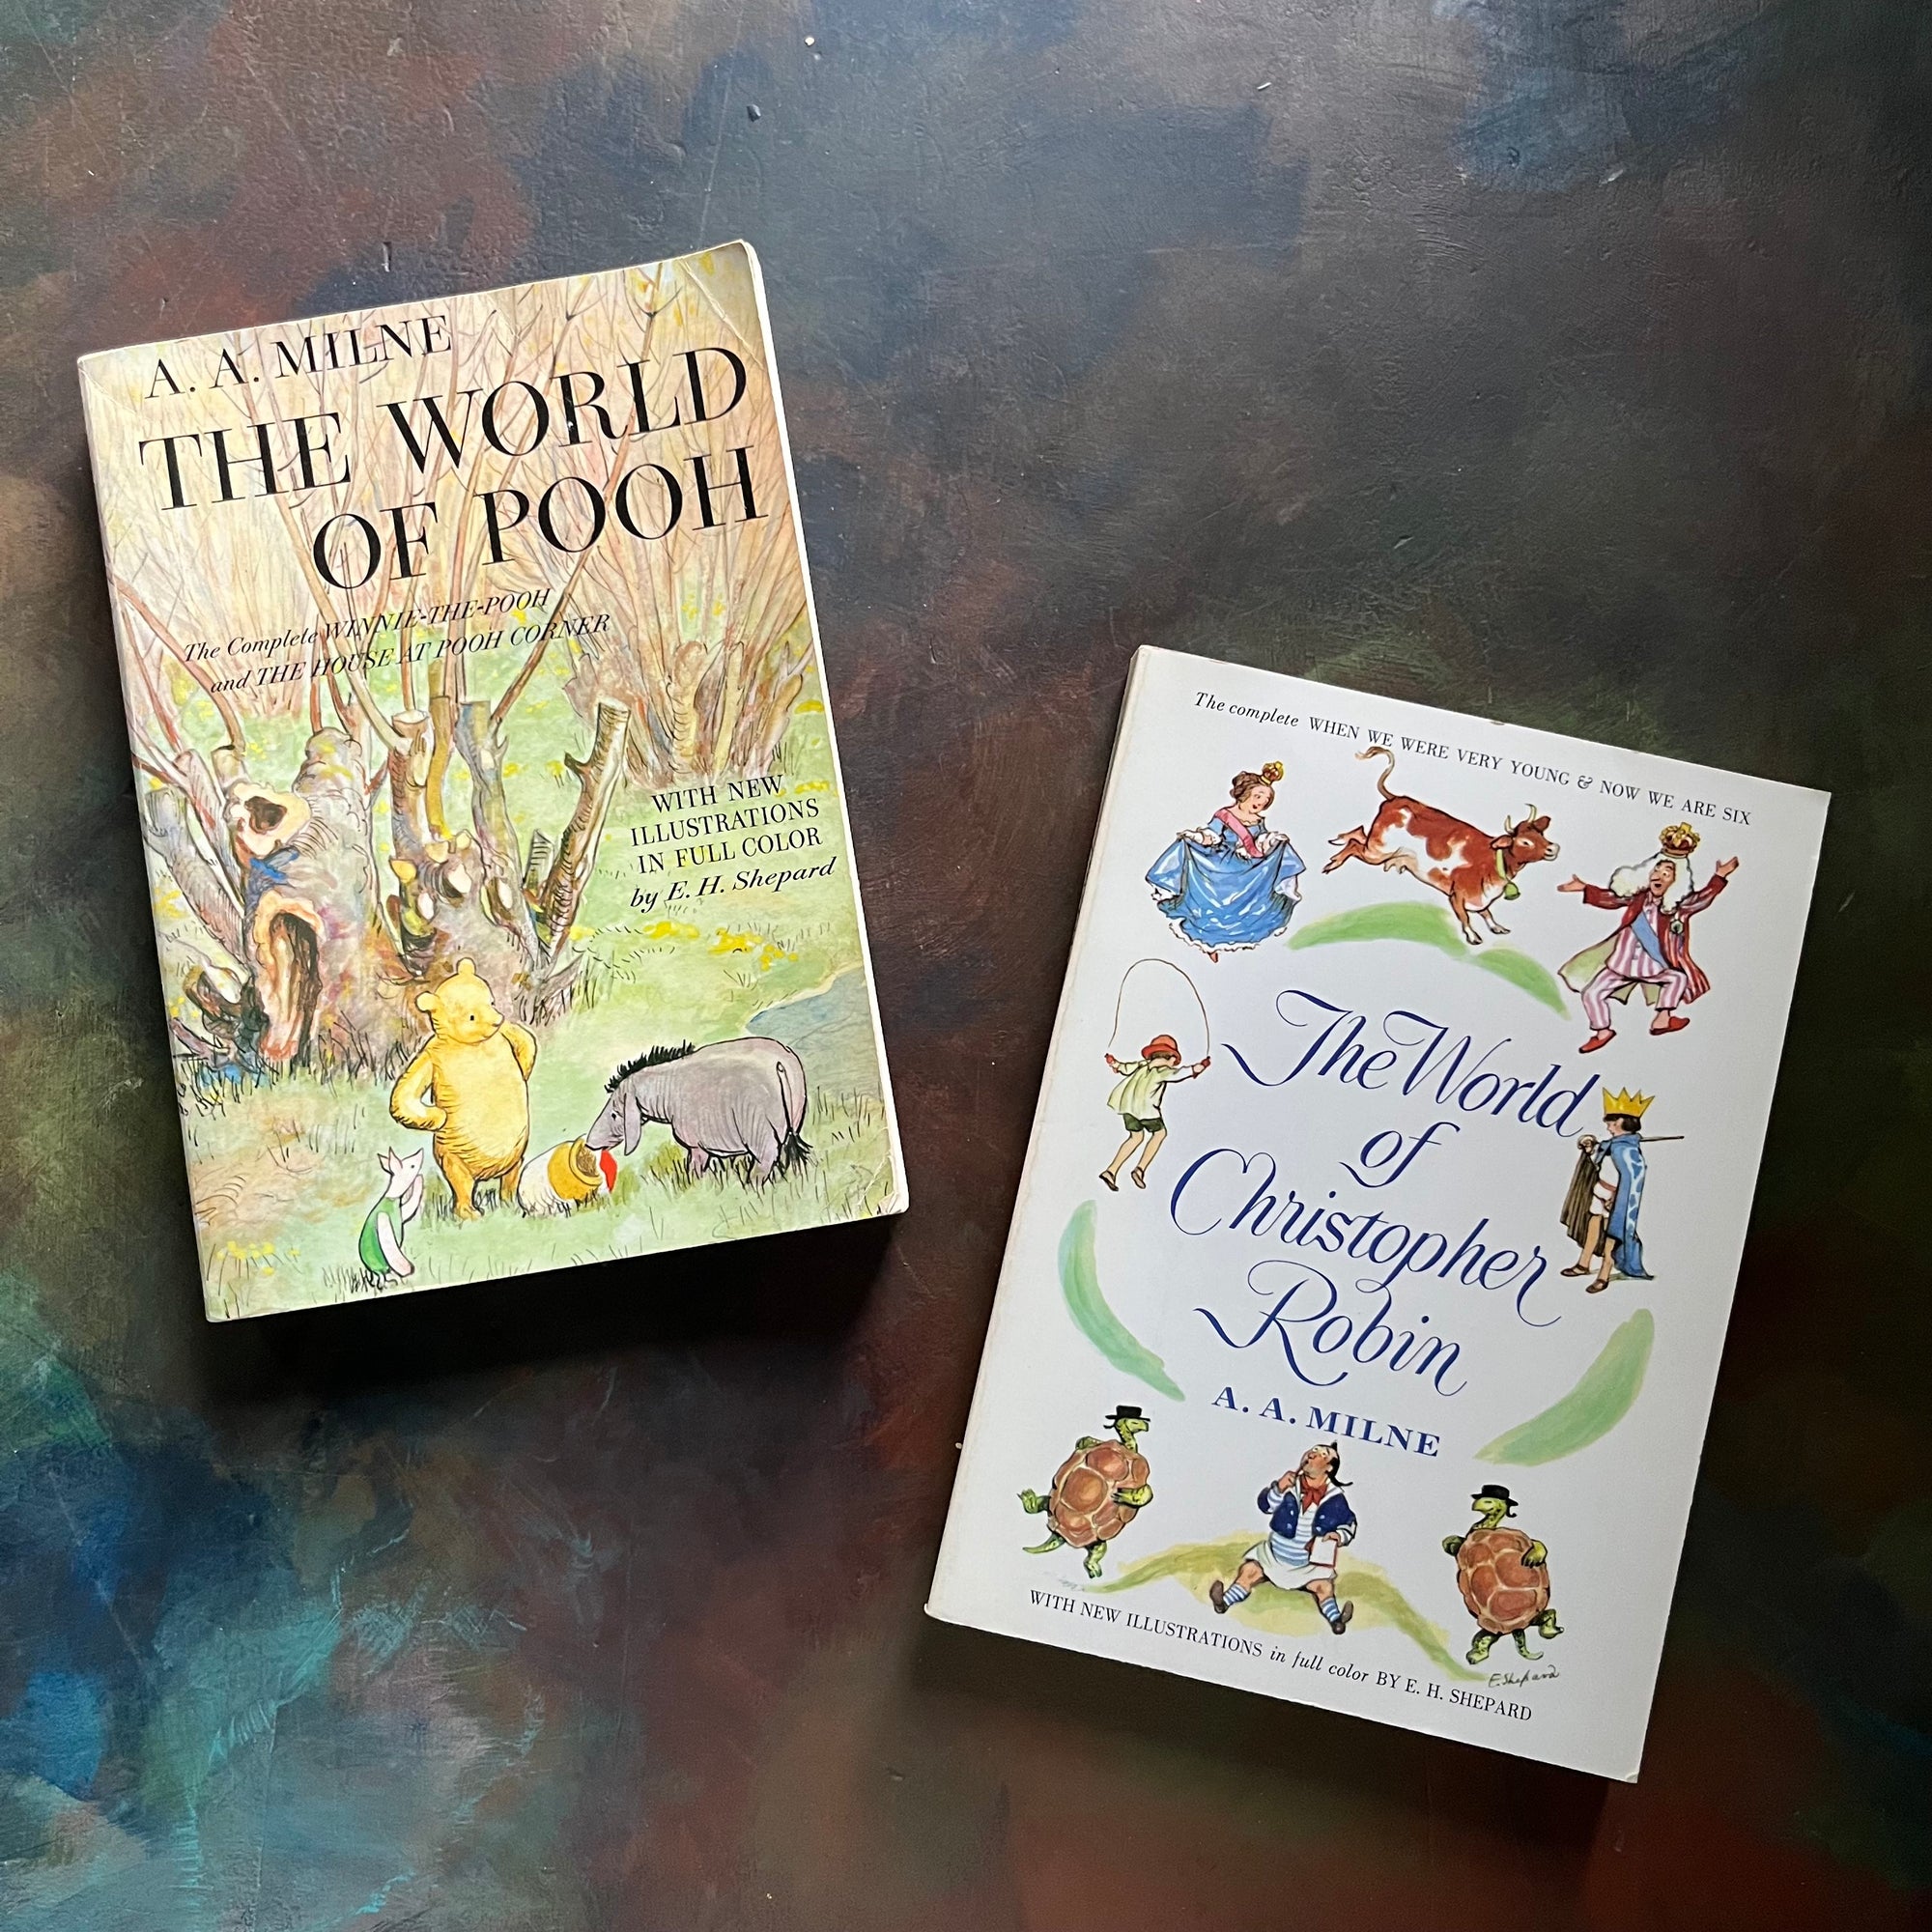 Pair of A. A. Milne Books-The World of Pooh and The World of Christopher Robin-short stories for children-poetry-illustrated by E. H. Shepard-view of the front covers